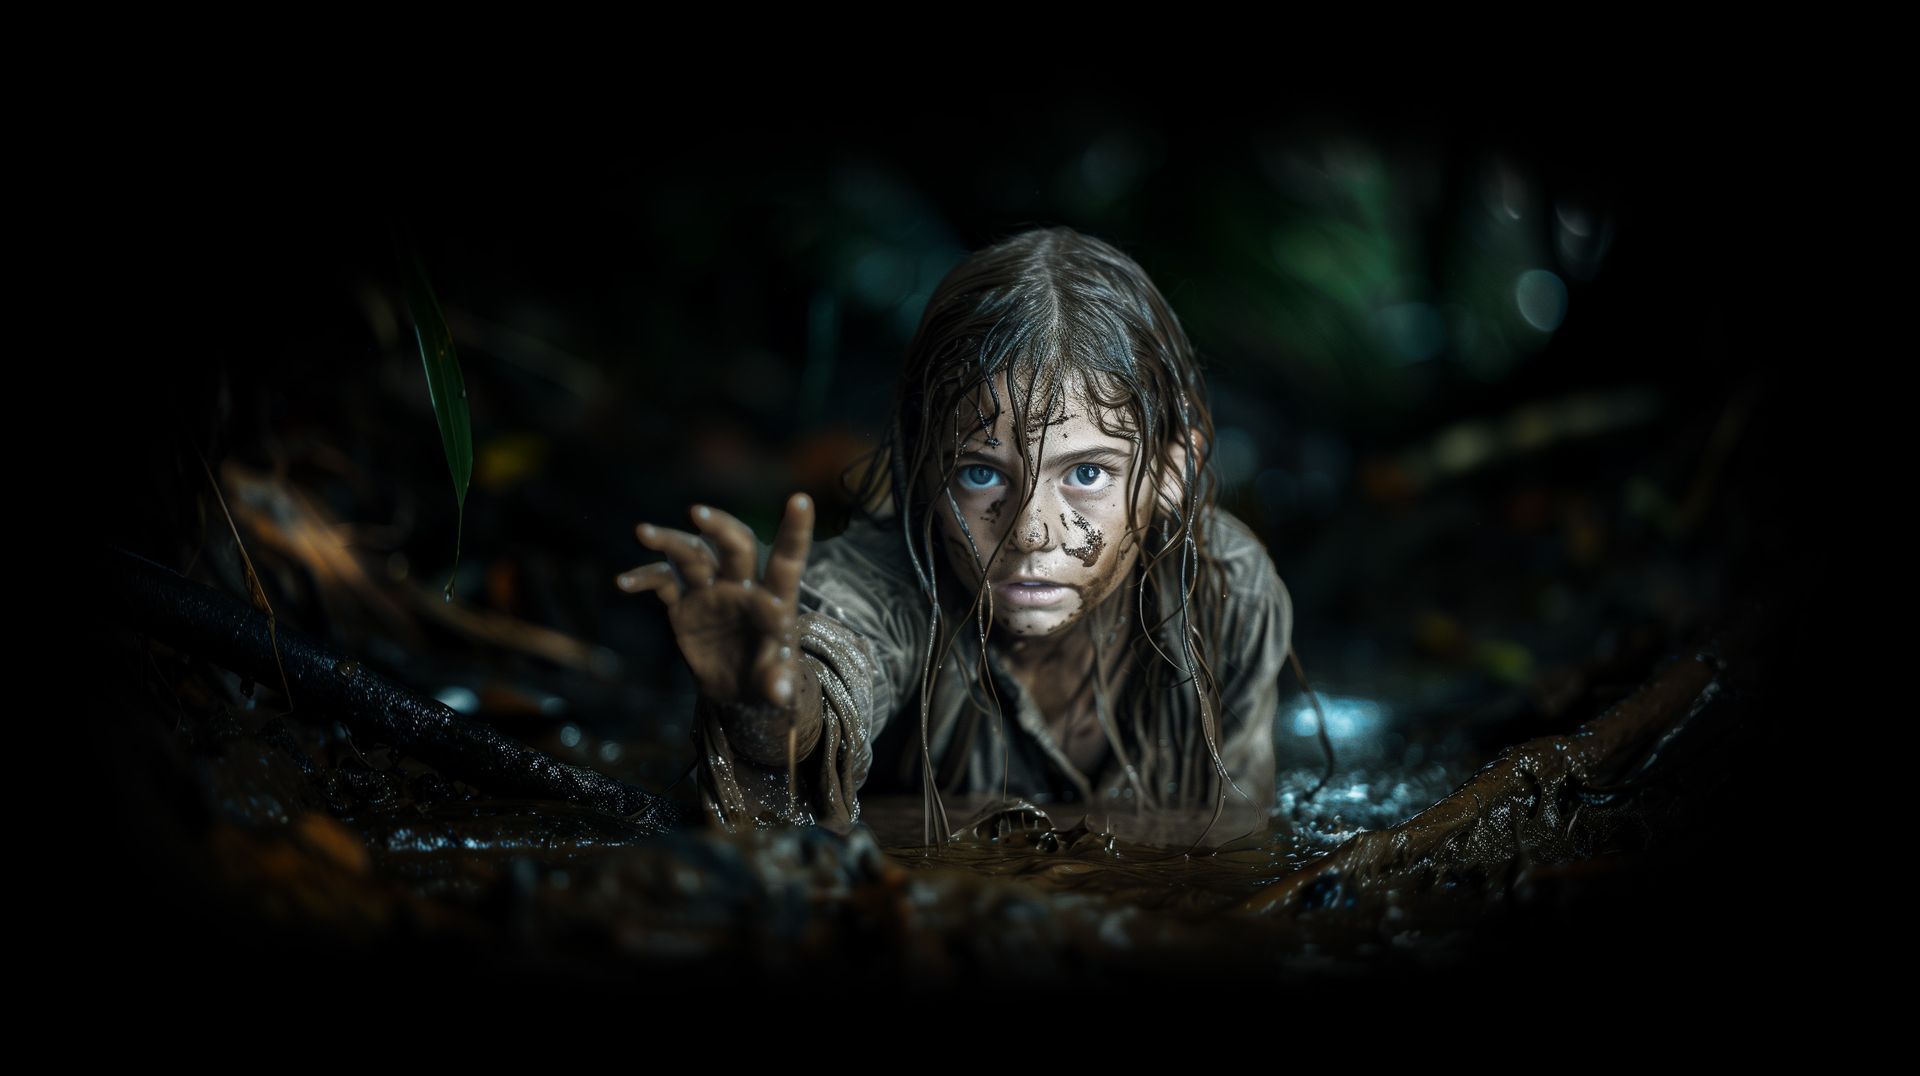 a young girl is crawling through a muddy puddle .